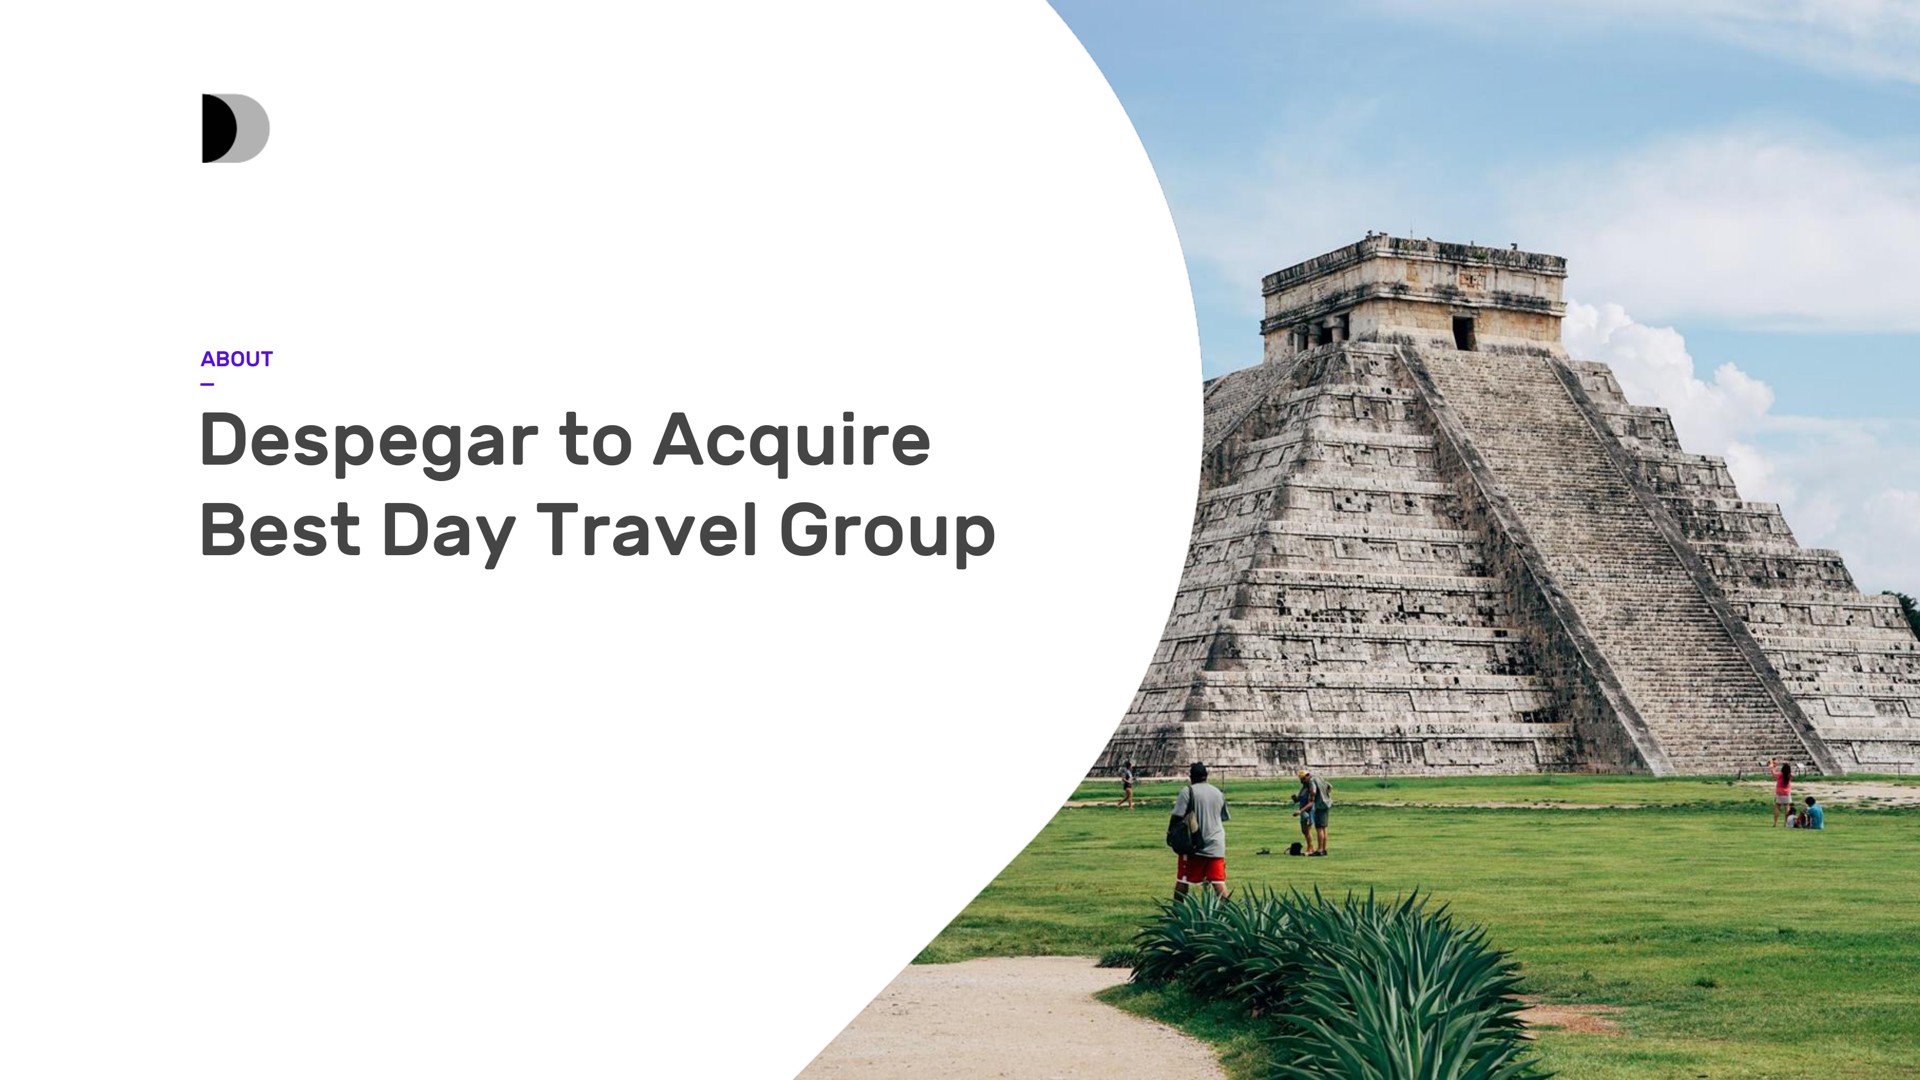 to acquire best day travel group | Despegar